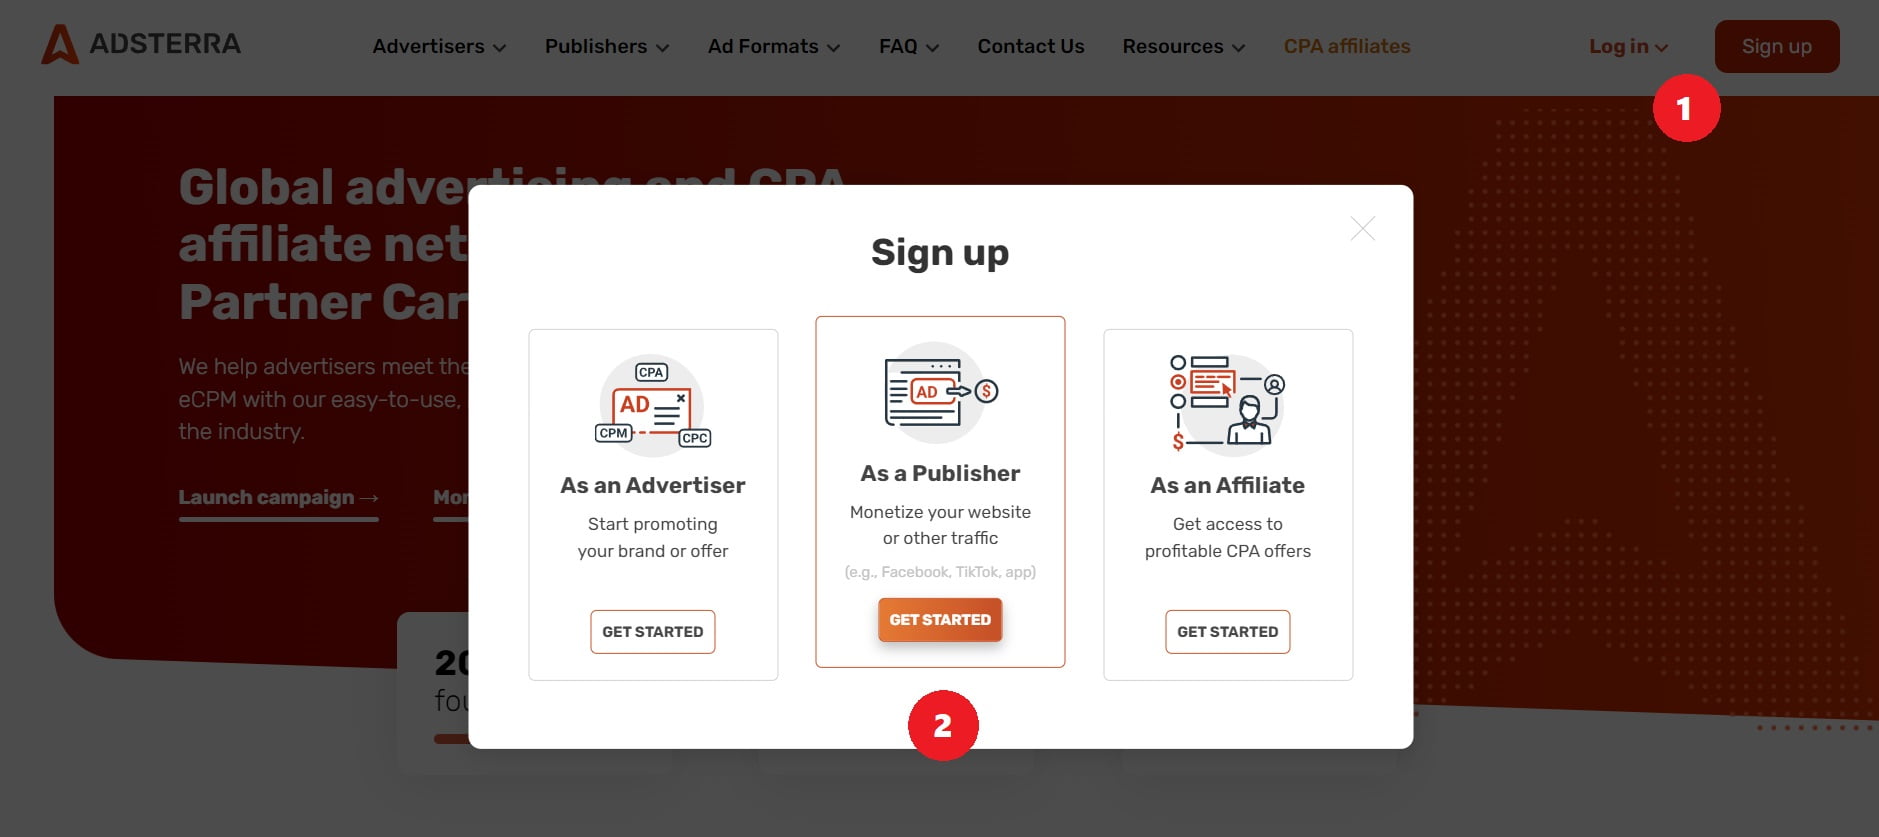 Getting started with Adsterra as a publisher